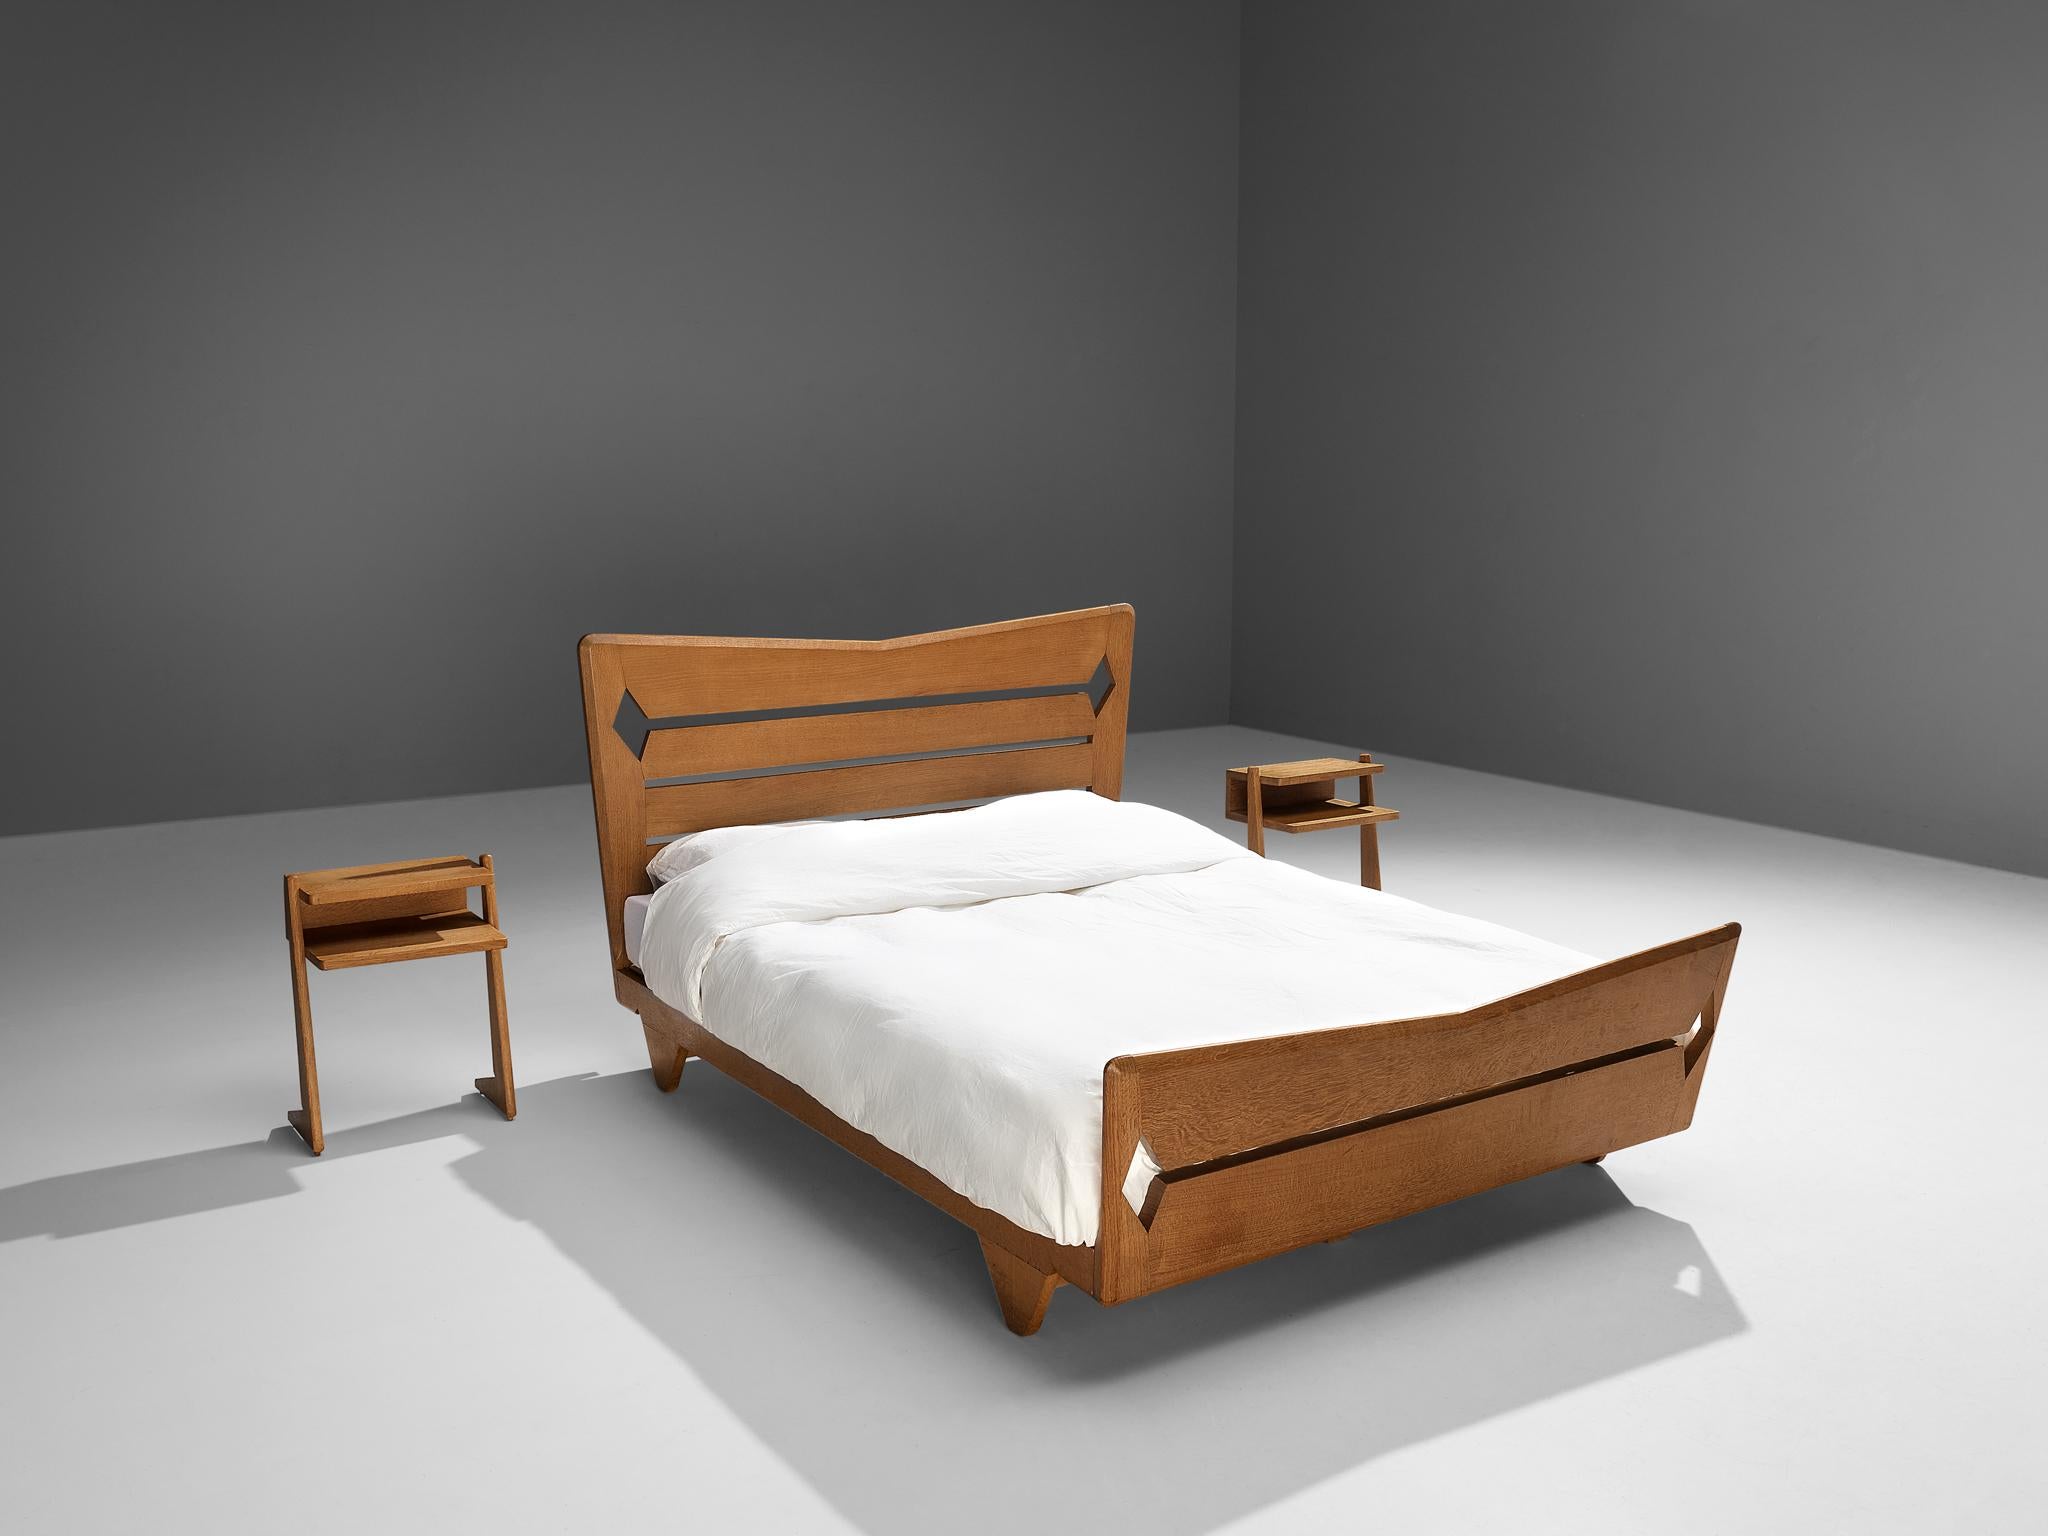 Guillerme et Chambron, double bed with nightstands, oak, France, 1960s

This set's main feature is obvious: It is all about the wood work. The excellent crafted frame has stunning sculpted detailing on the head- and footboard, which gives it a very